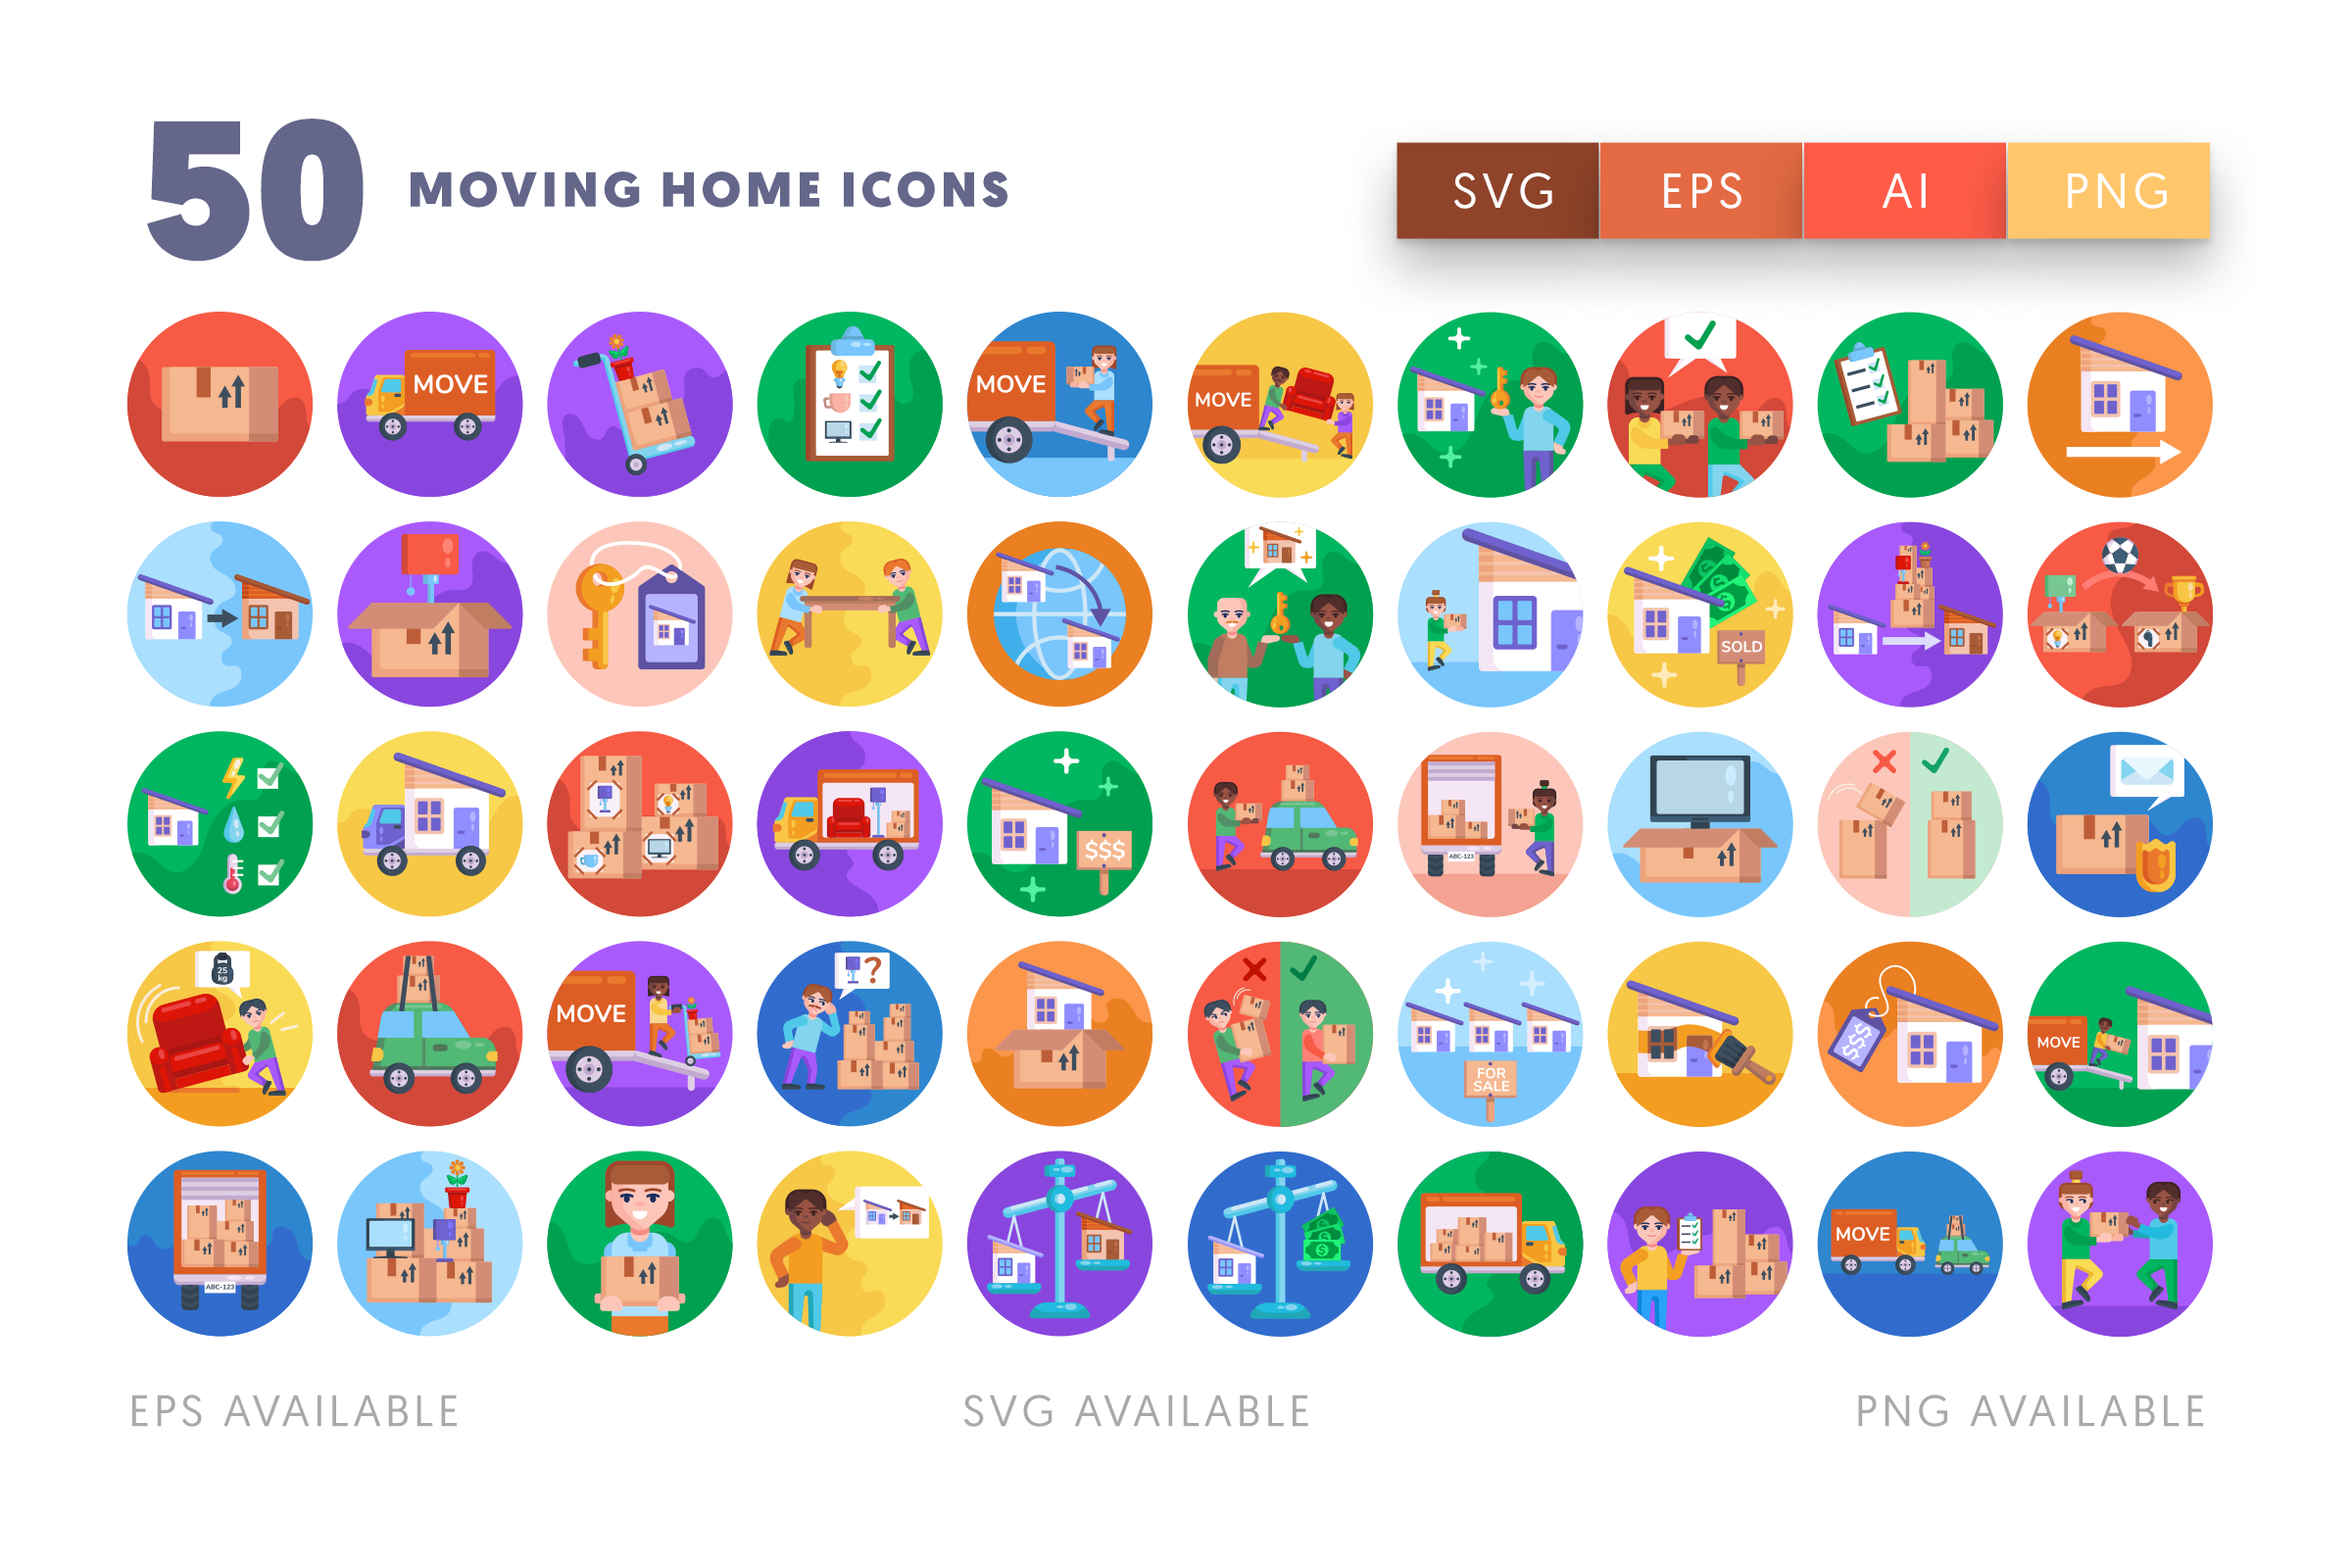 Moving Home icons png/svg/eps